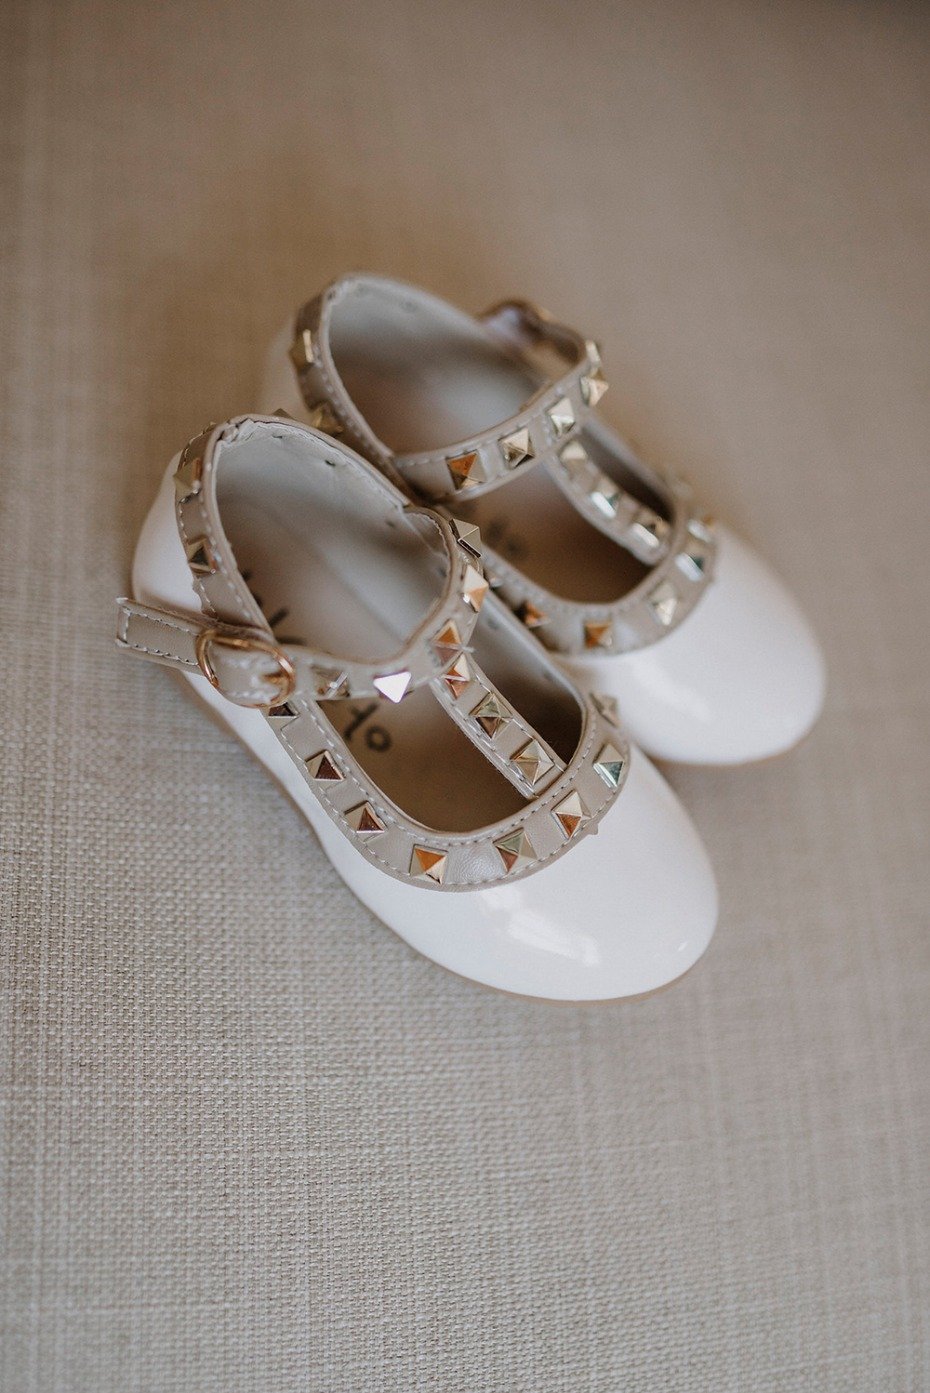 mini studded wedding shoes for the daughter of the bride